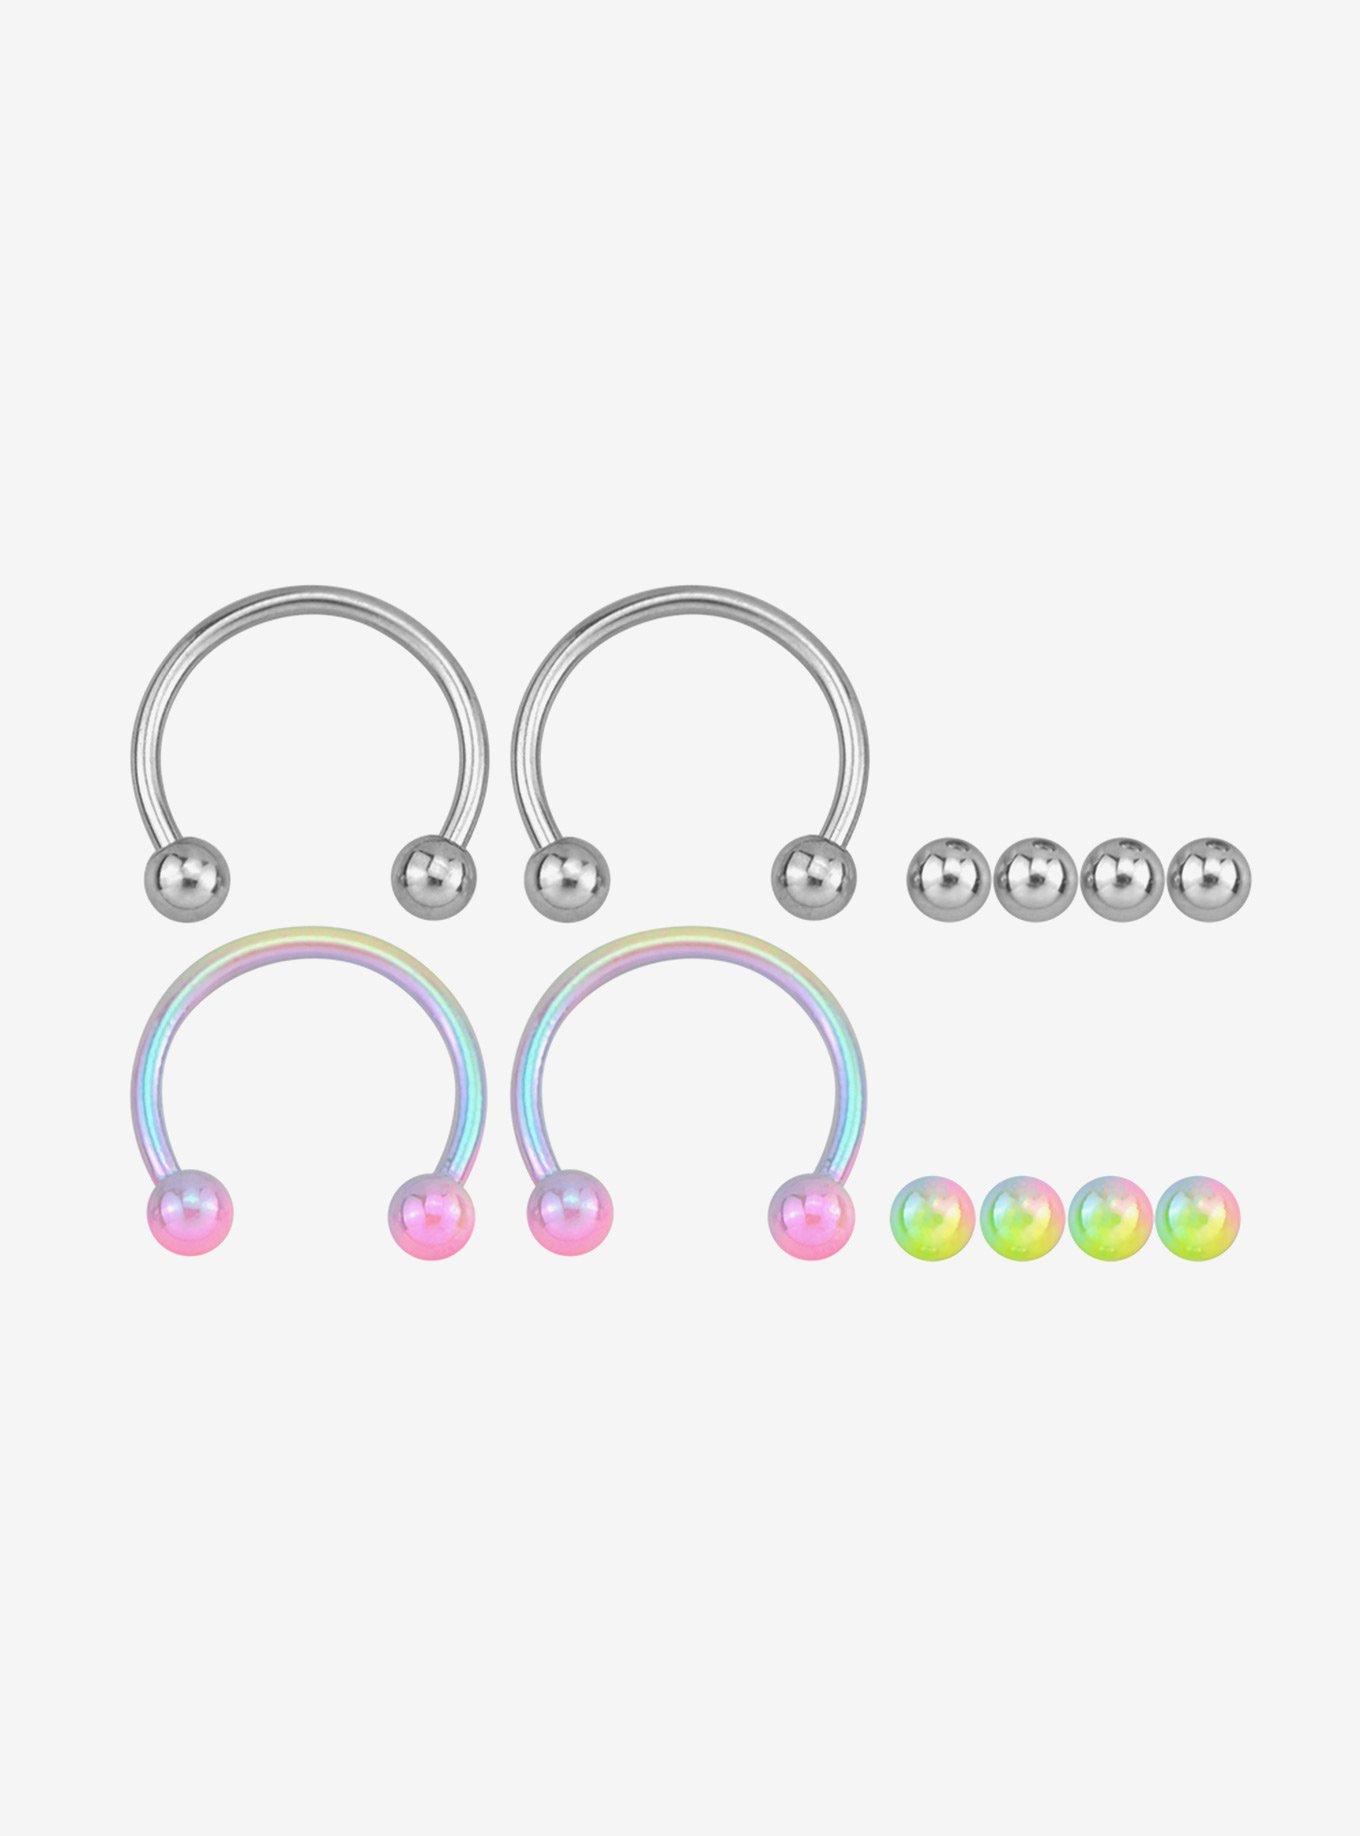 Steel Silver & Anodized Circular Barbell 4 Pack, MULTI, hi-res